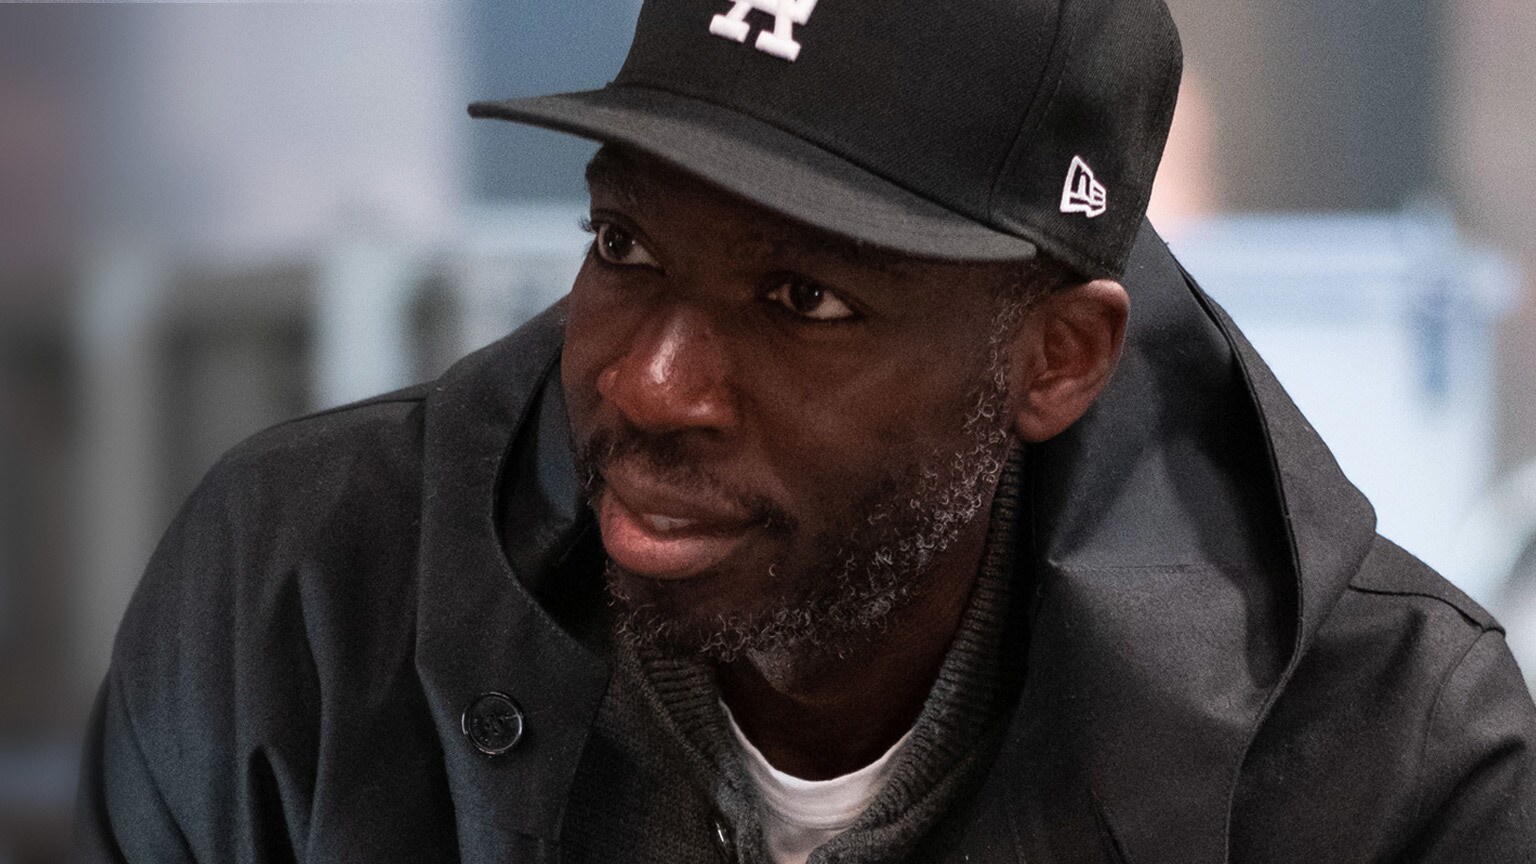 “Point of View Expands Cinema”: A Conversation with Rick Famuyiwa for Black History Month